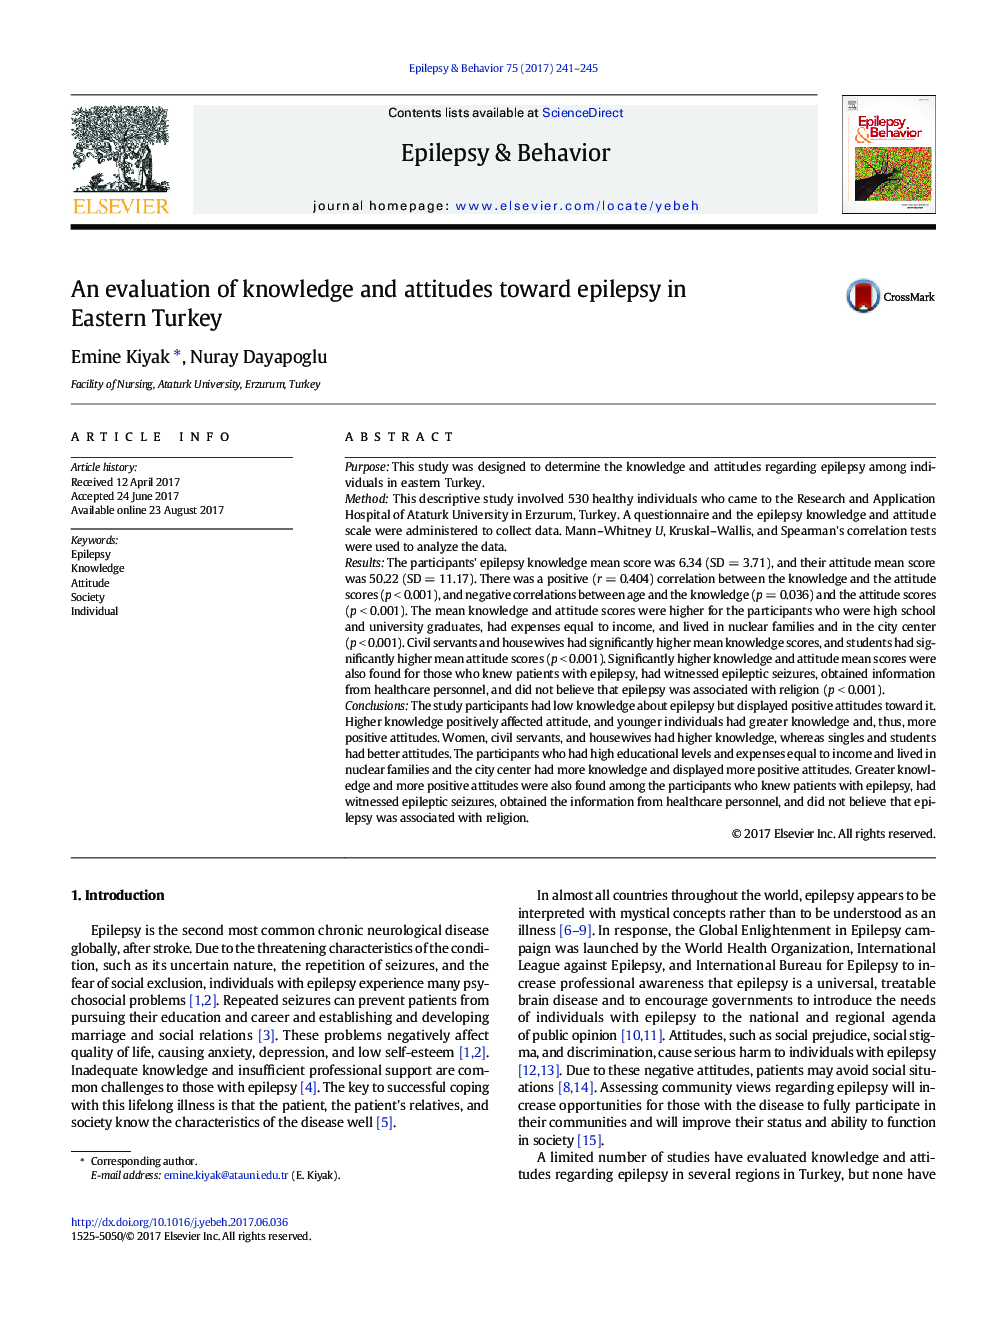 An evaluation of knowledge and attitudes toward epilepsy in Eastern Turkey